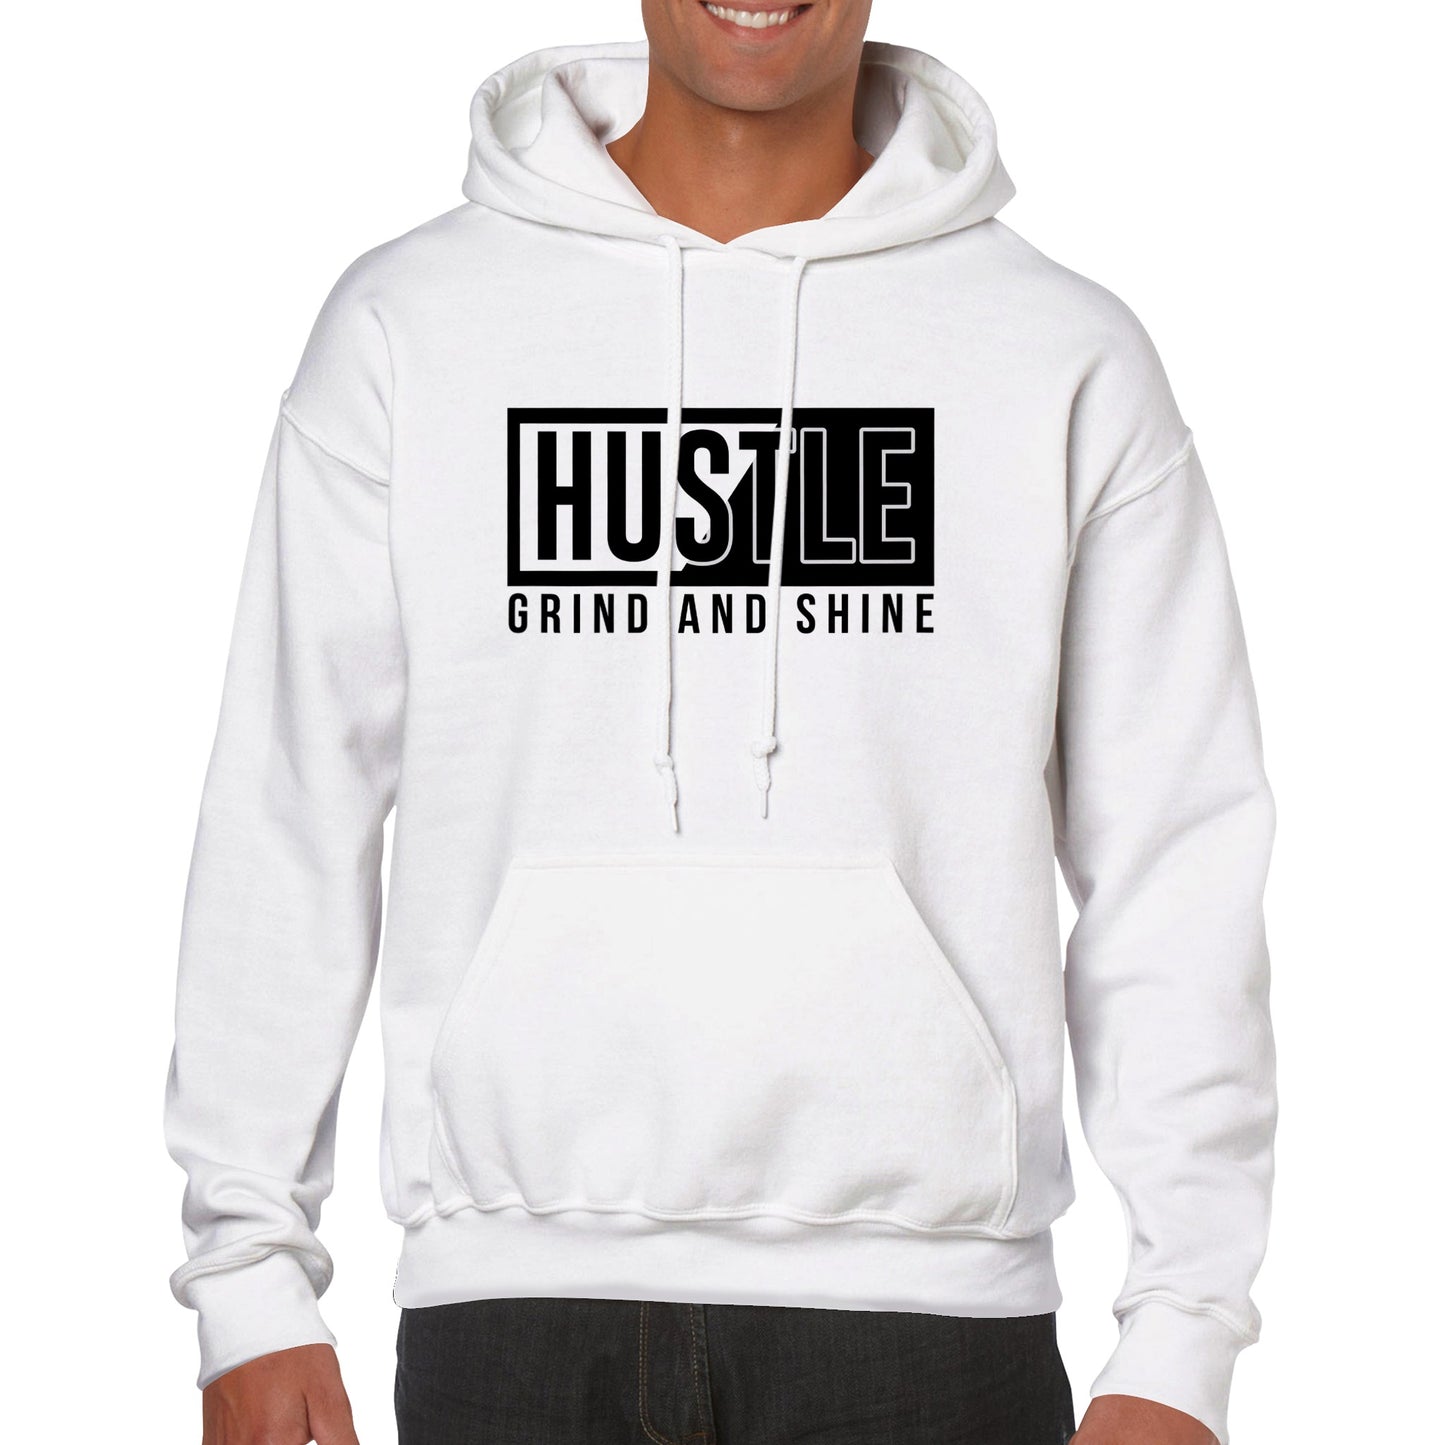 Hustle, Grind and Shine - Classic Unisex Pullover Hoodie